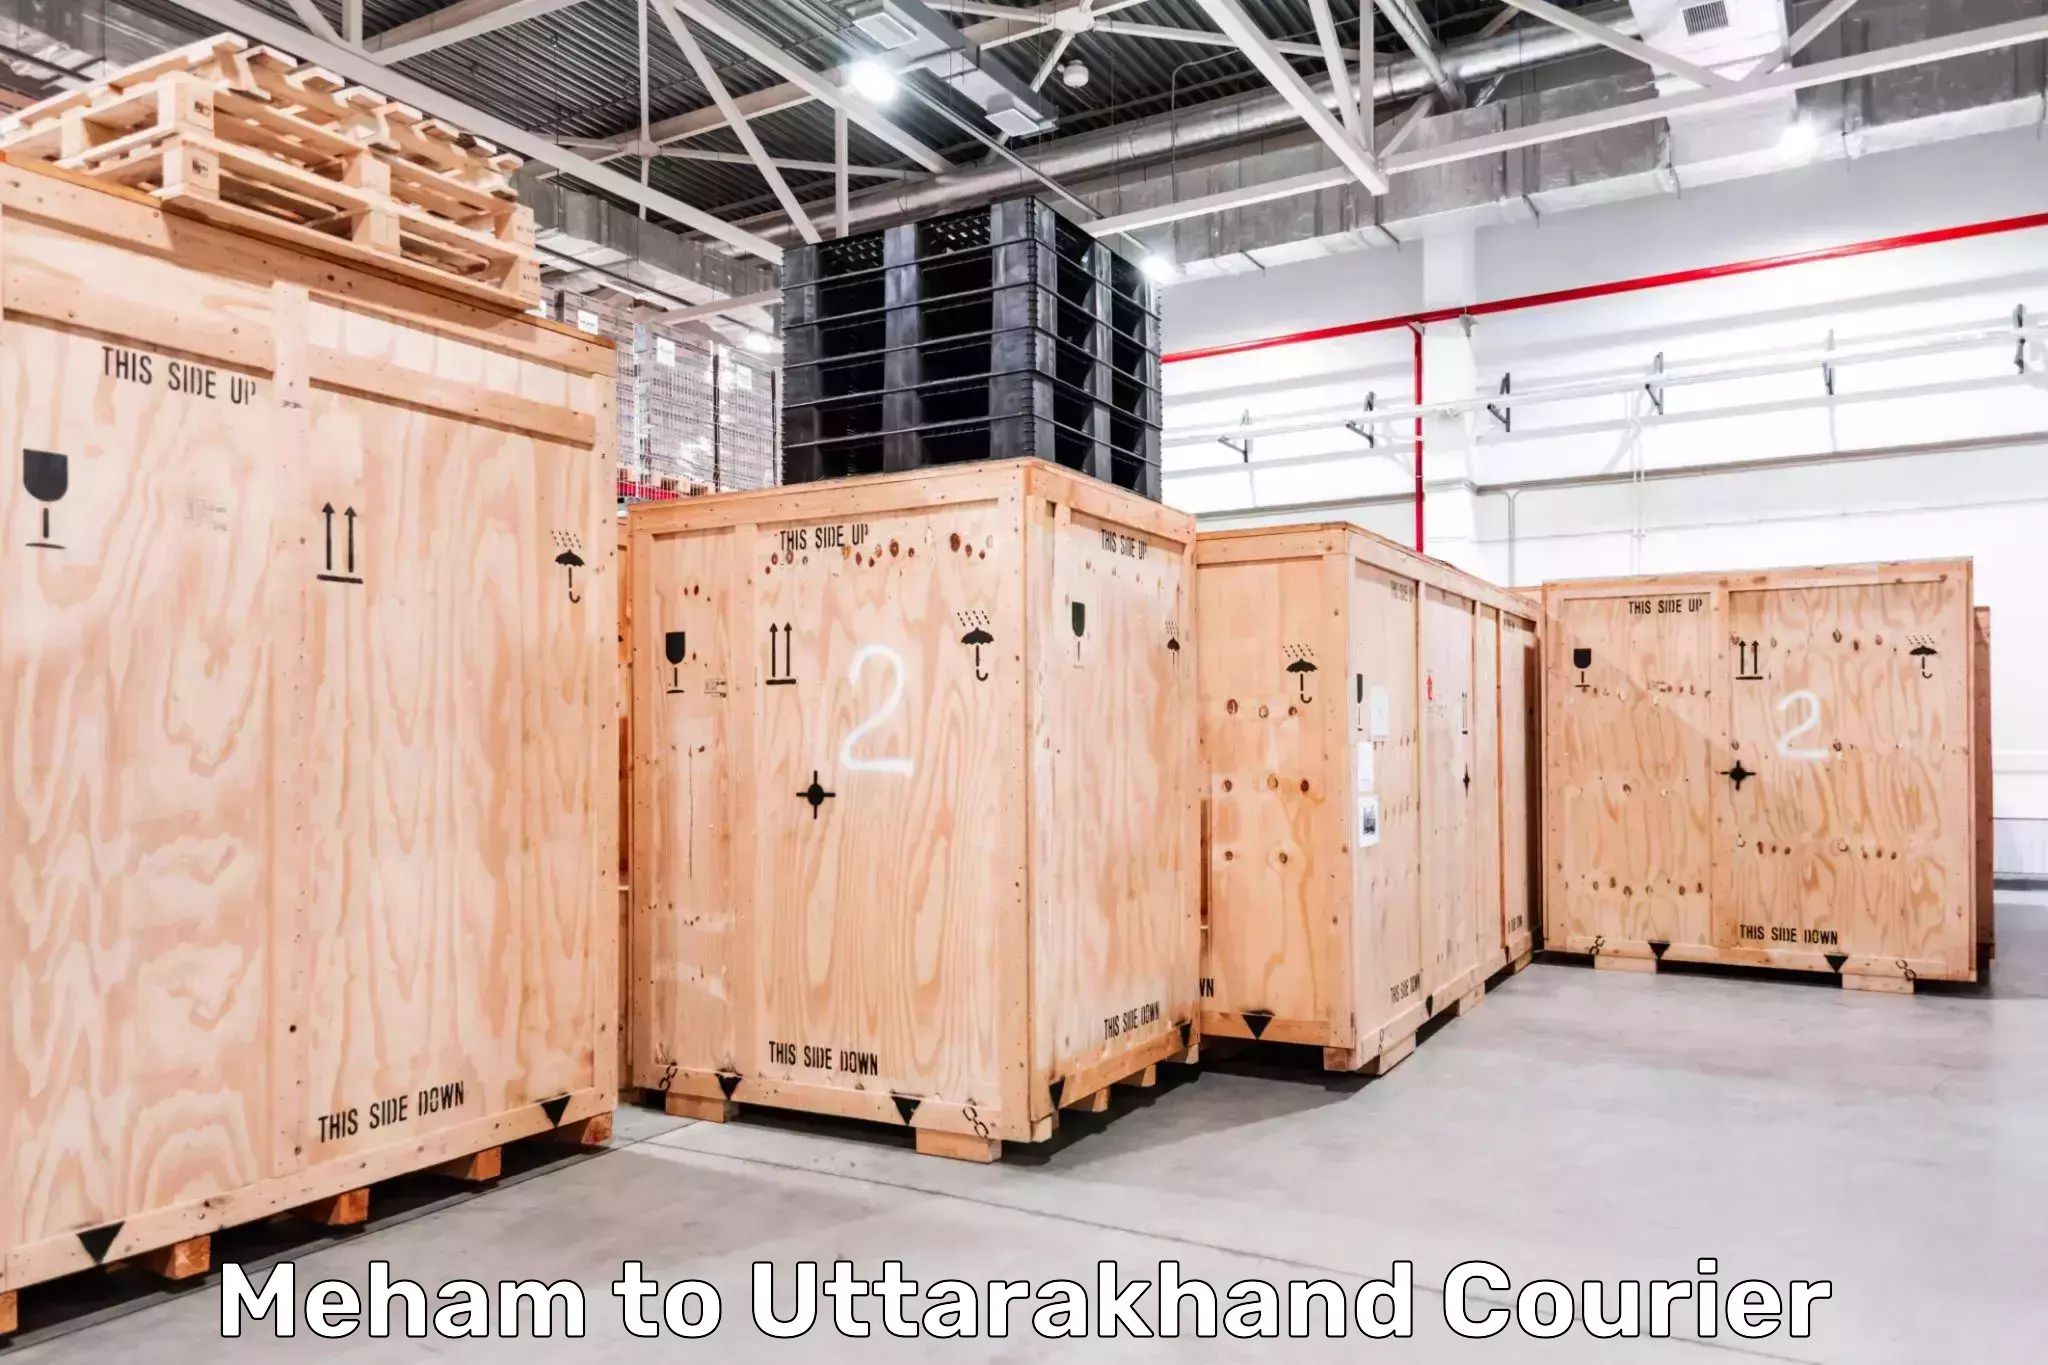 State-of-the-art courier technology Meham to Lansdowne